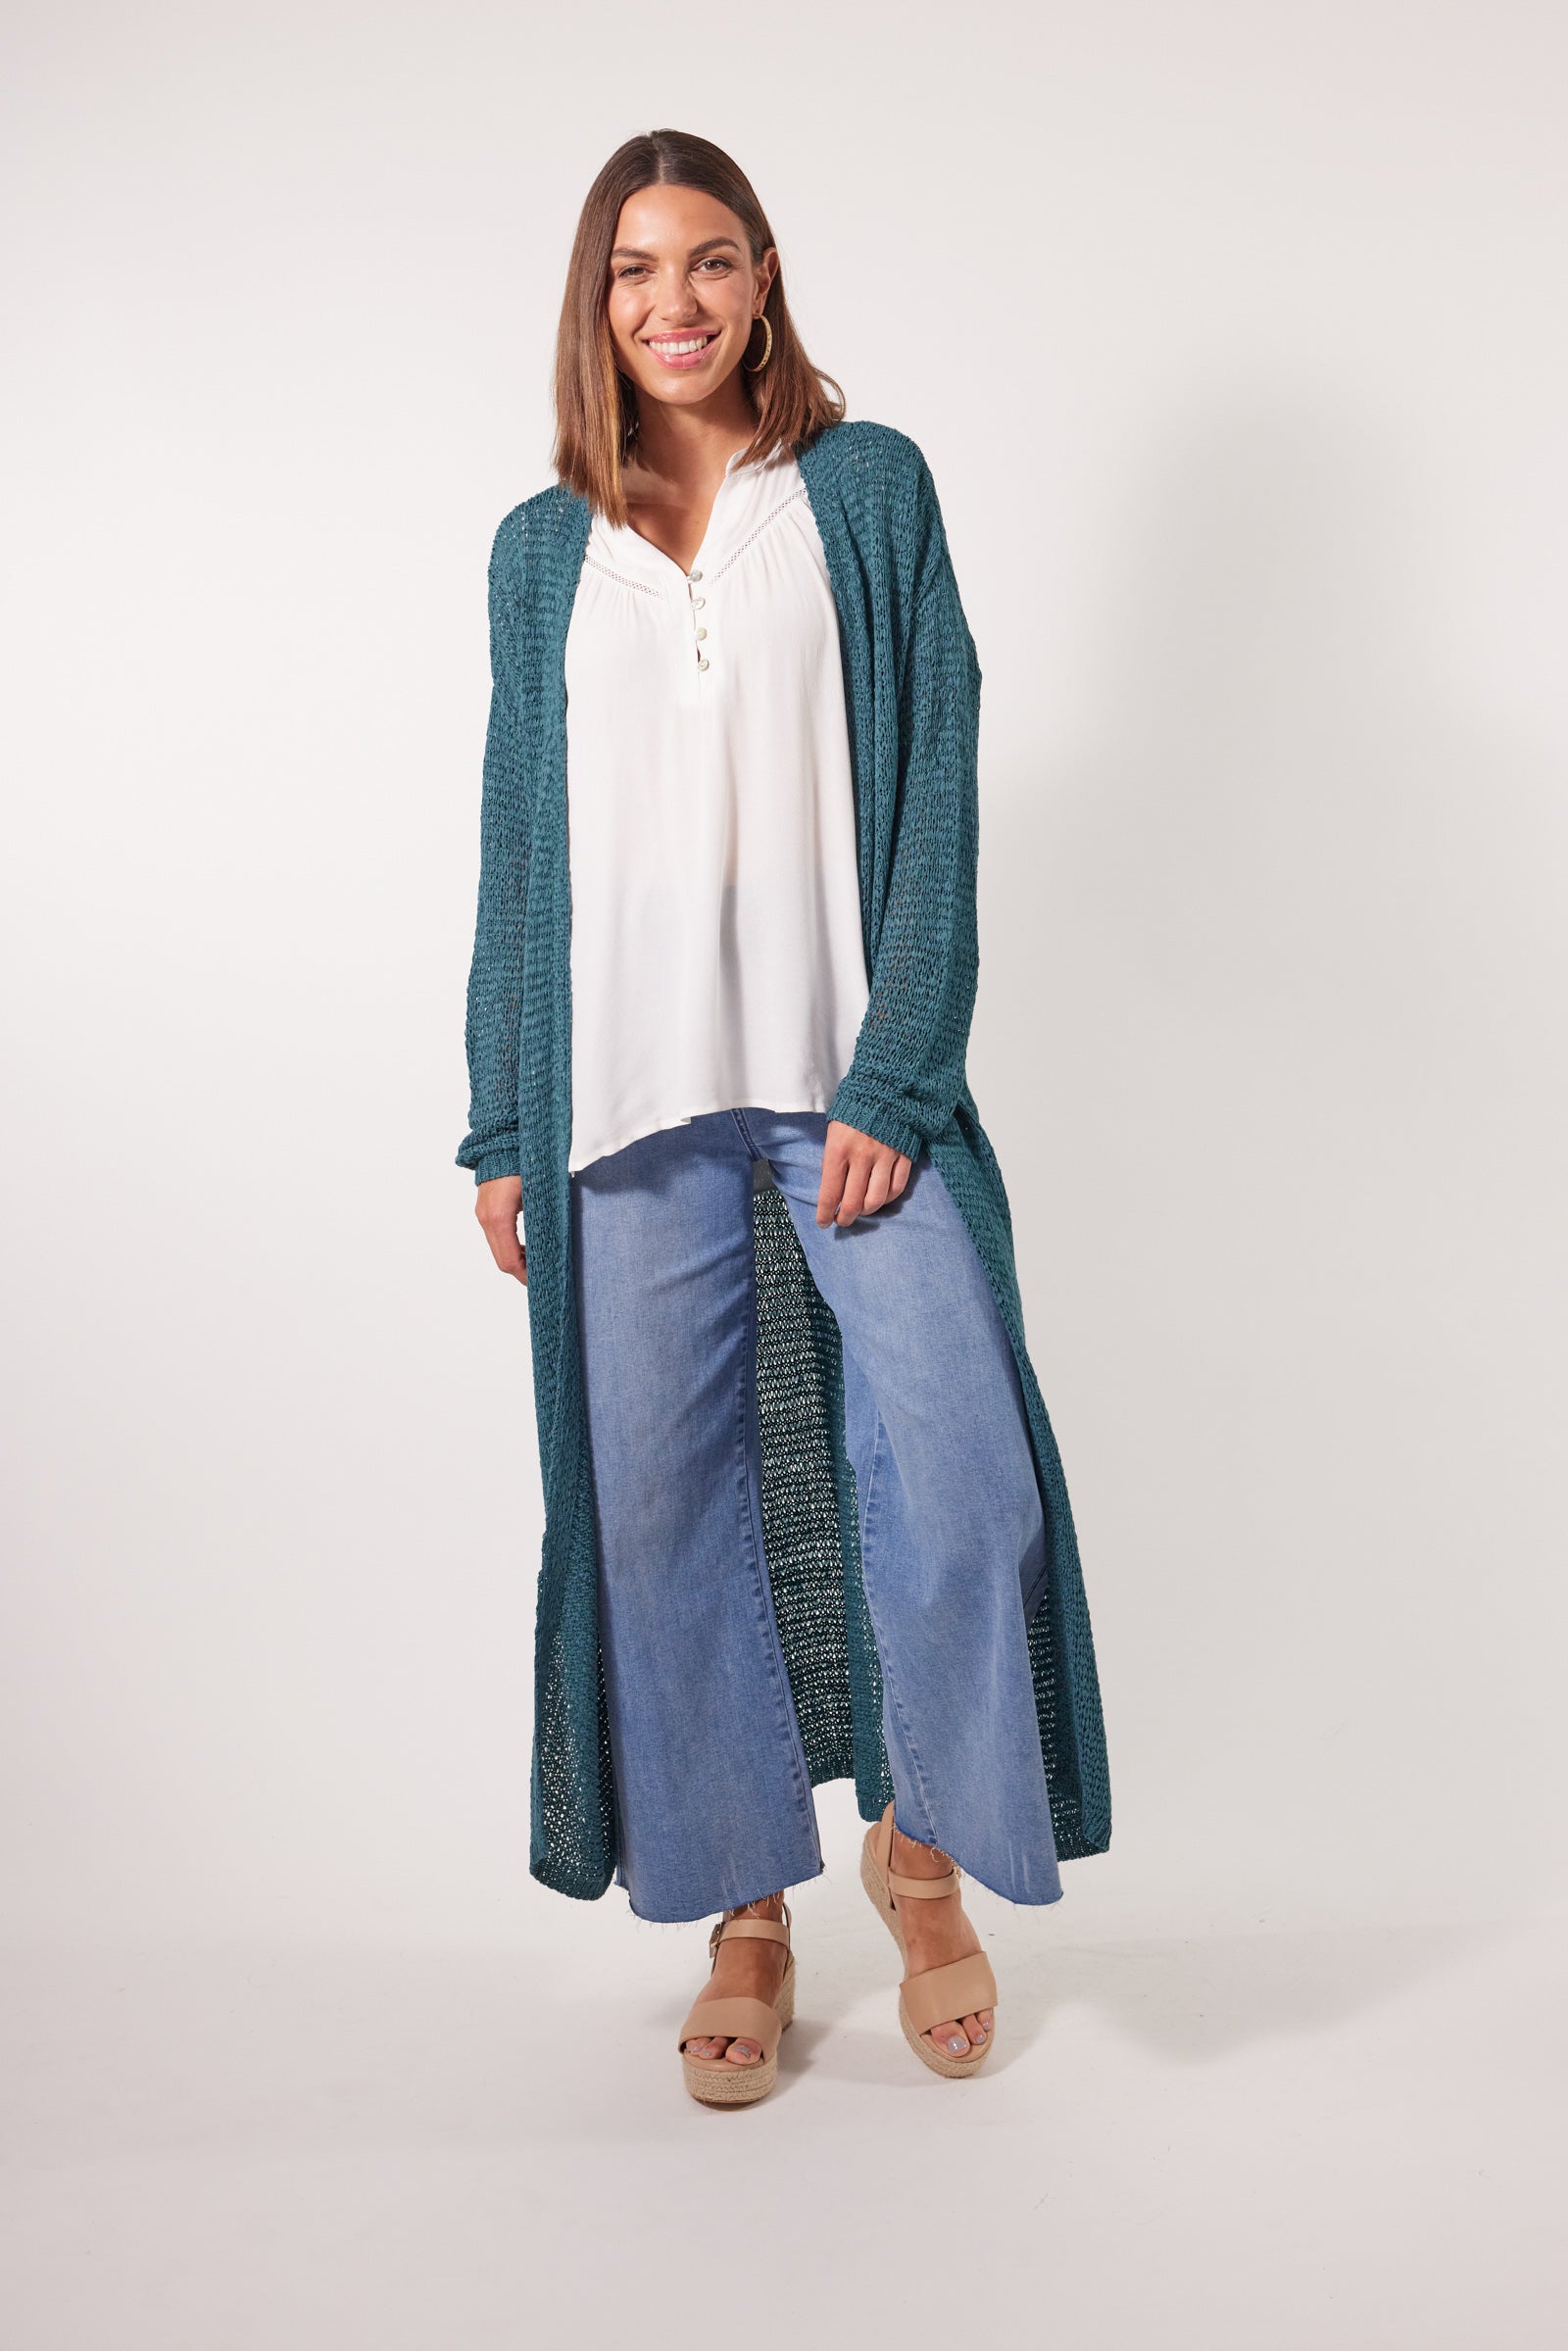 Marquee Cardigan - Teal - Isle of Mine Clothing - Knit Cardigan Long